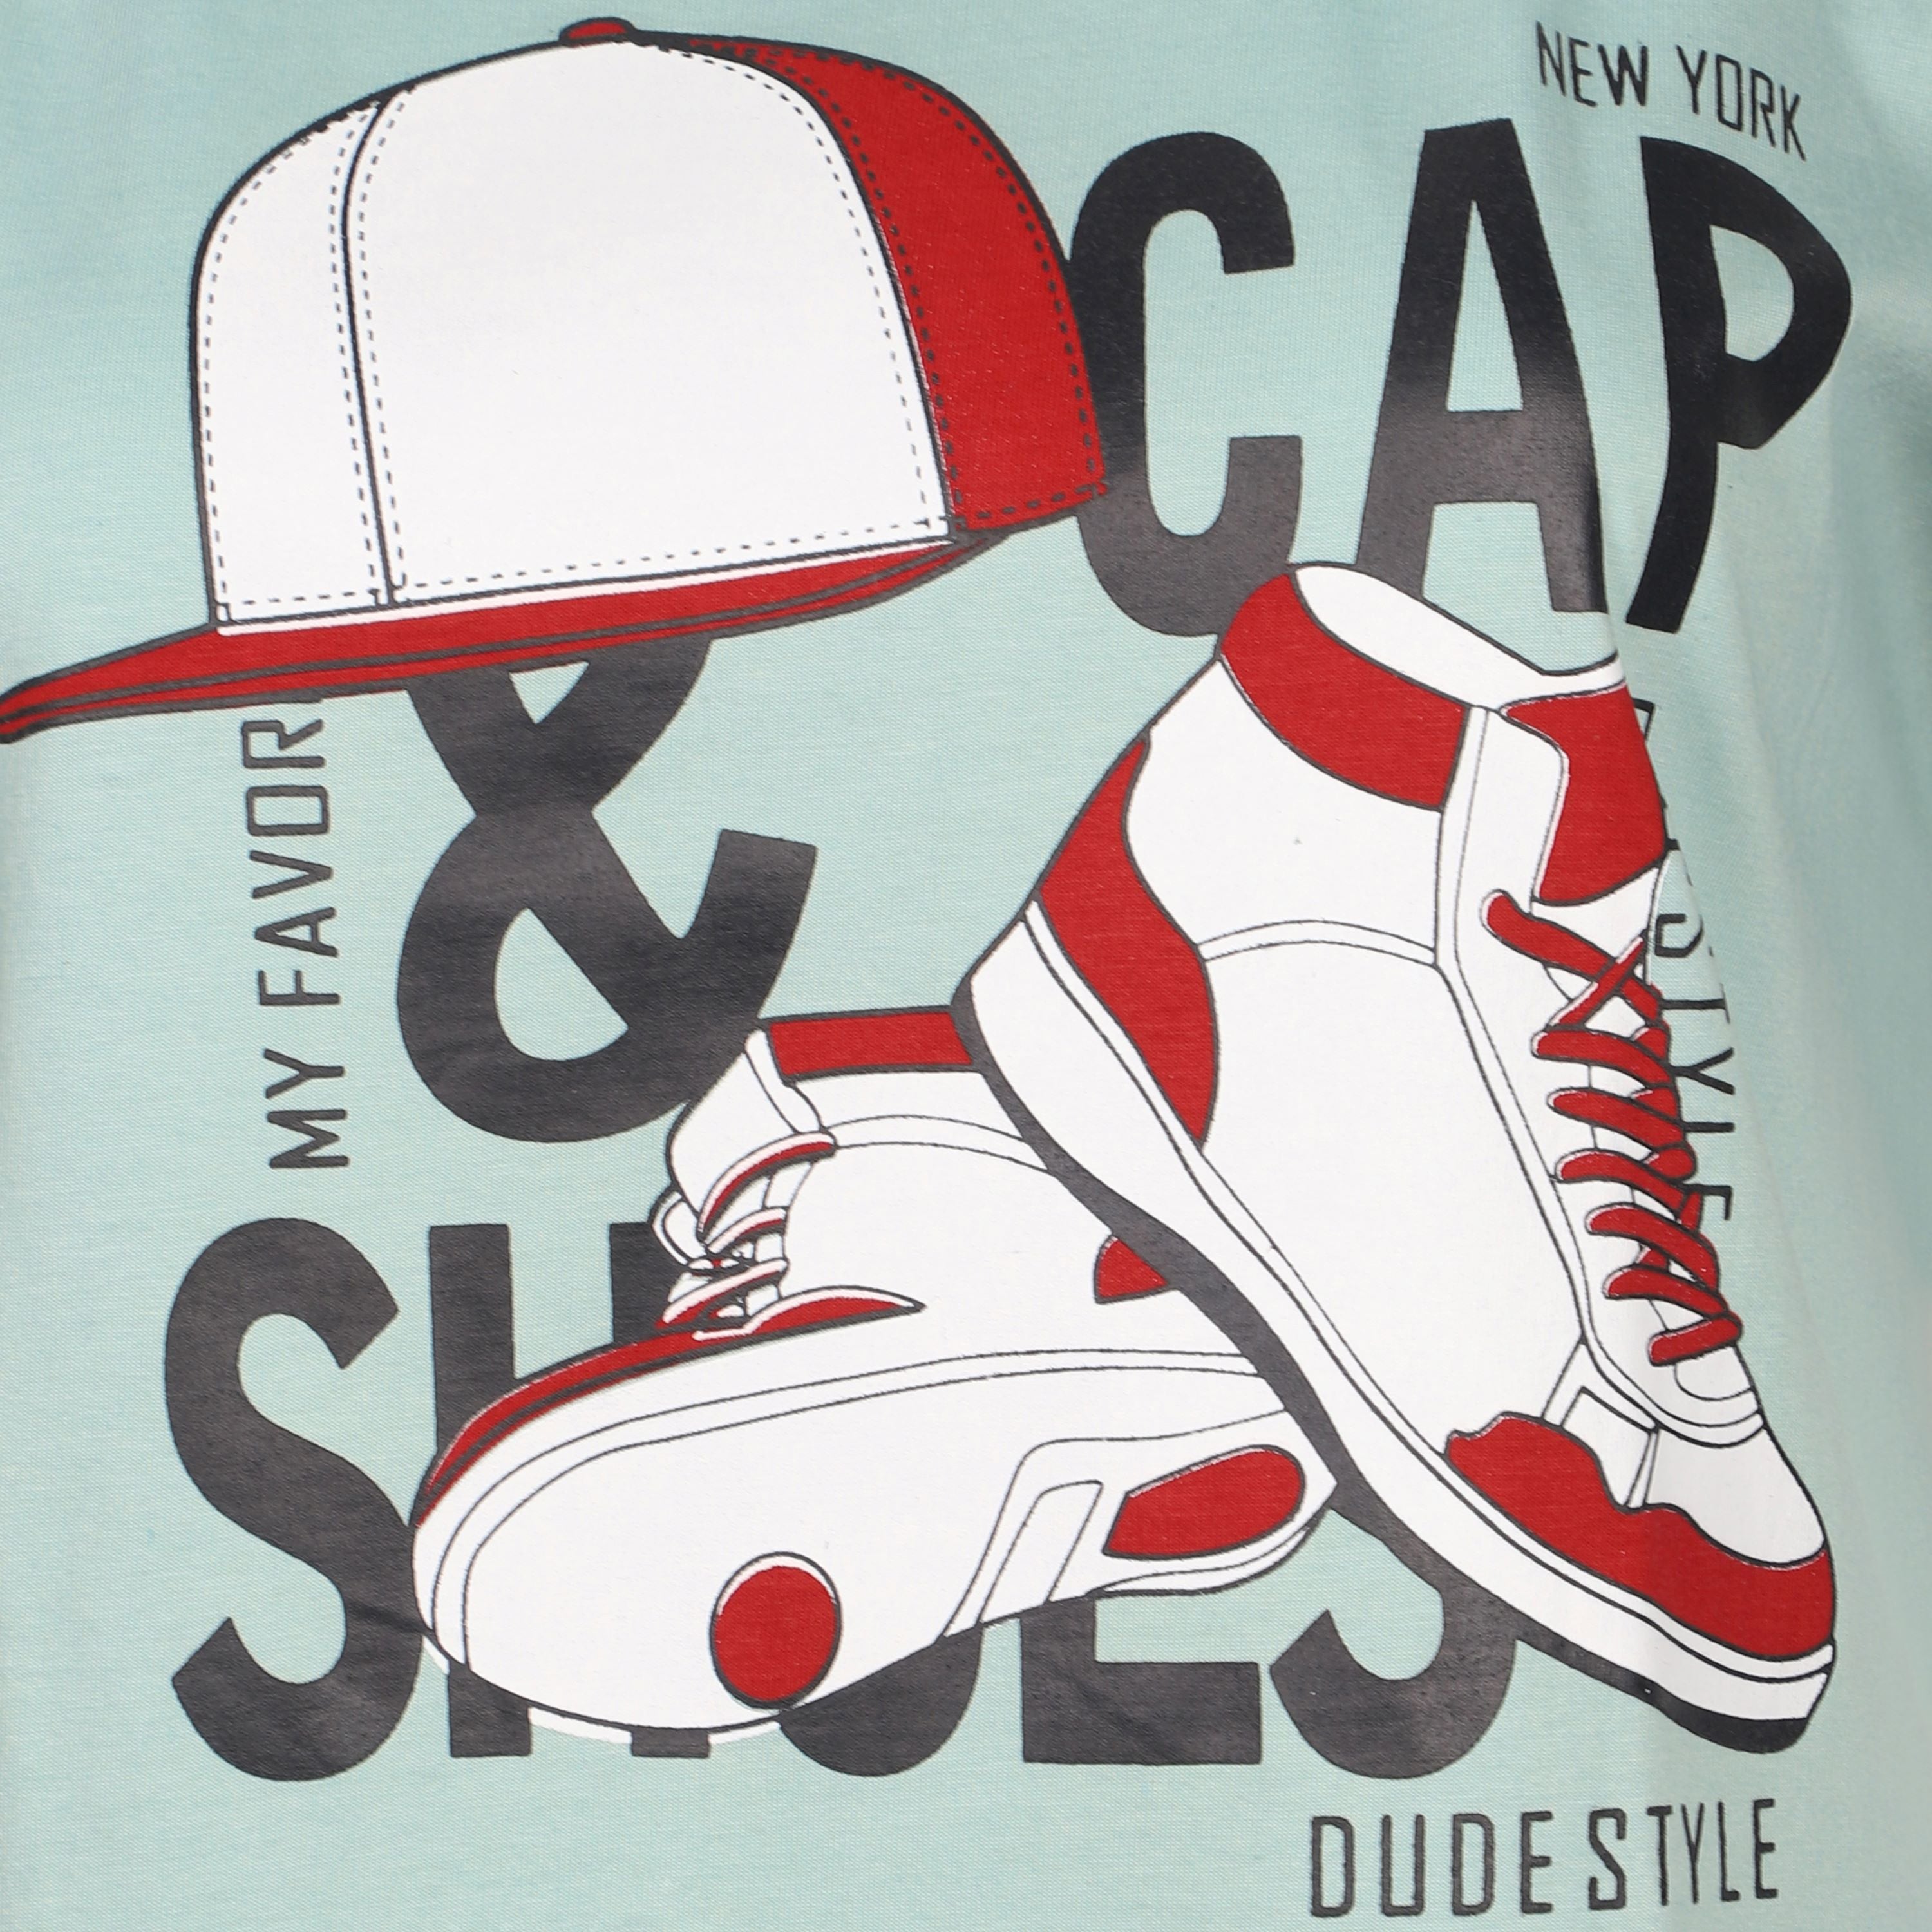 Boys Graphic T-shirt-Caps and shoes-Teal